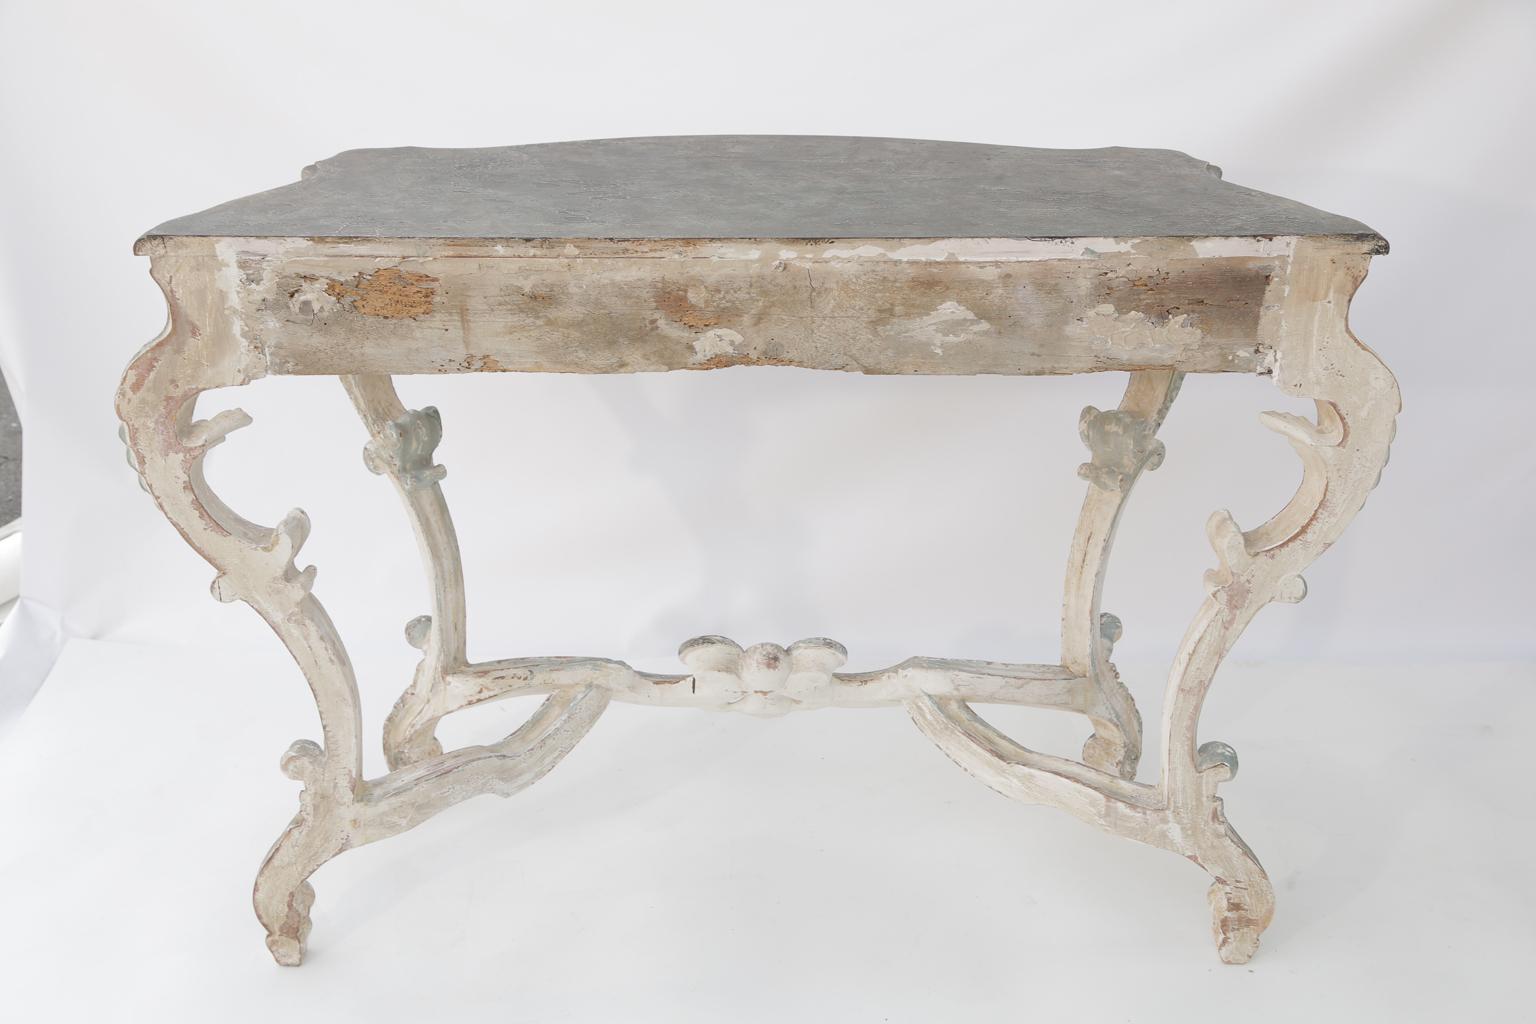 Pair of Rococo consoles, each having a shaped, faux-painted top, on a painted frame showing natural wear, the table base with pierced carvings in high Rococo relief, with very large, carved foliage rocaille and scroll work to its apron, the